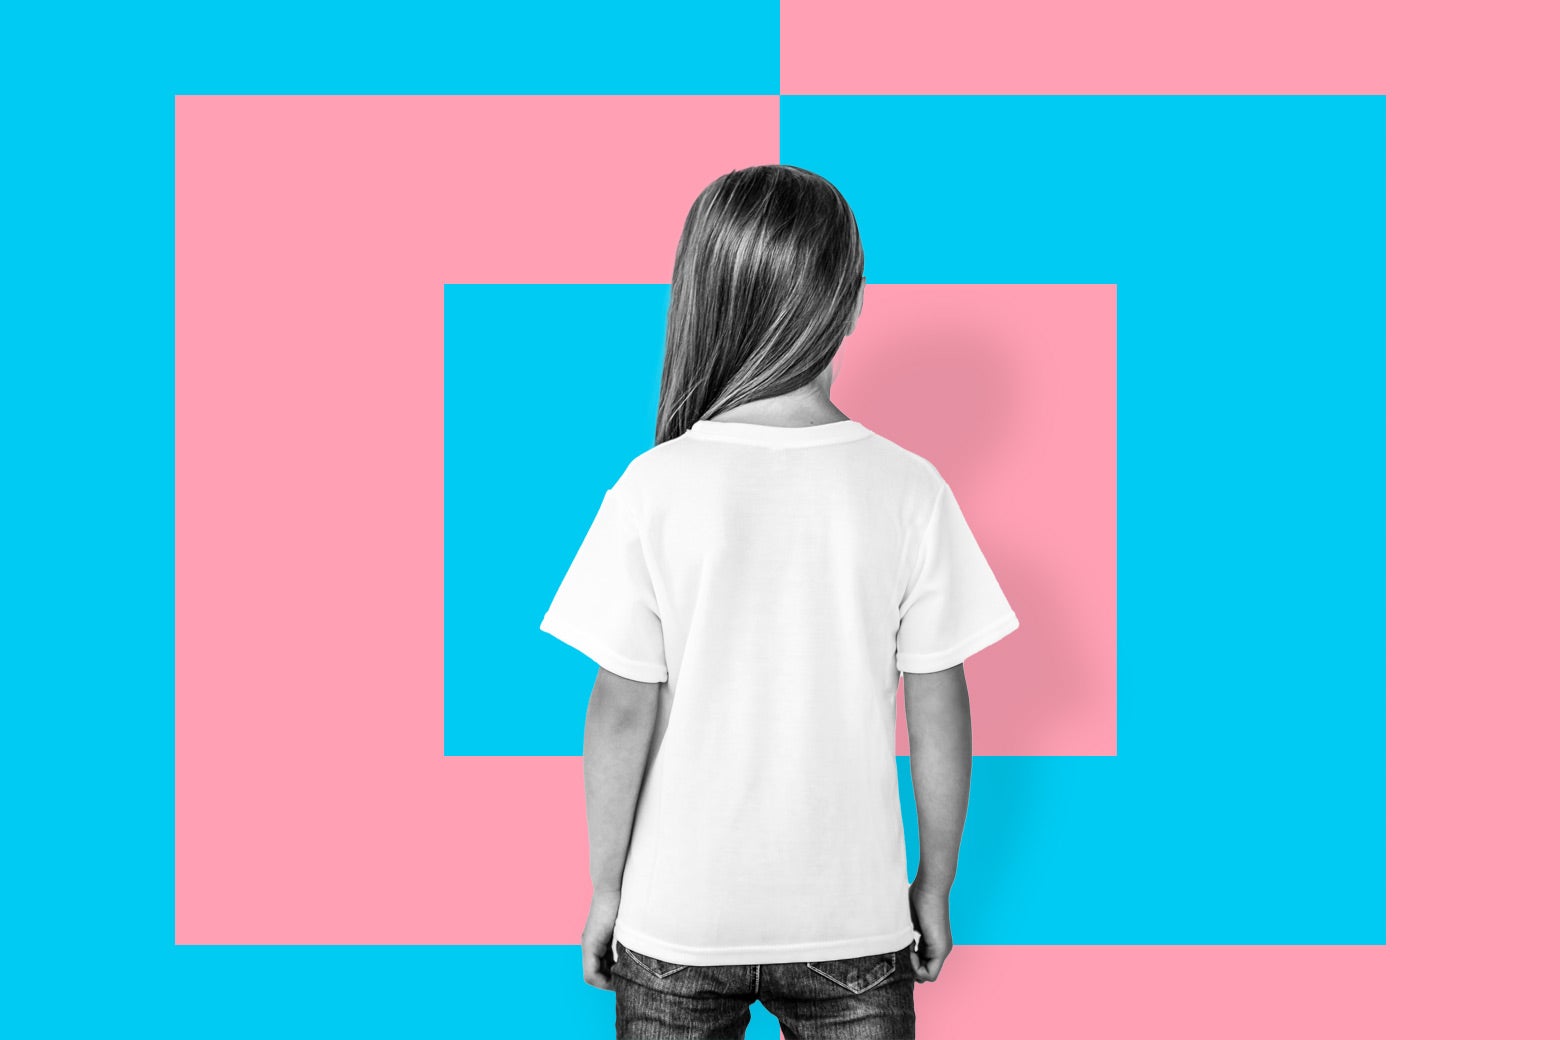 A silhouette of the back of a child against an alternating pink and blue background.